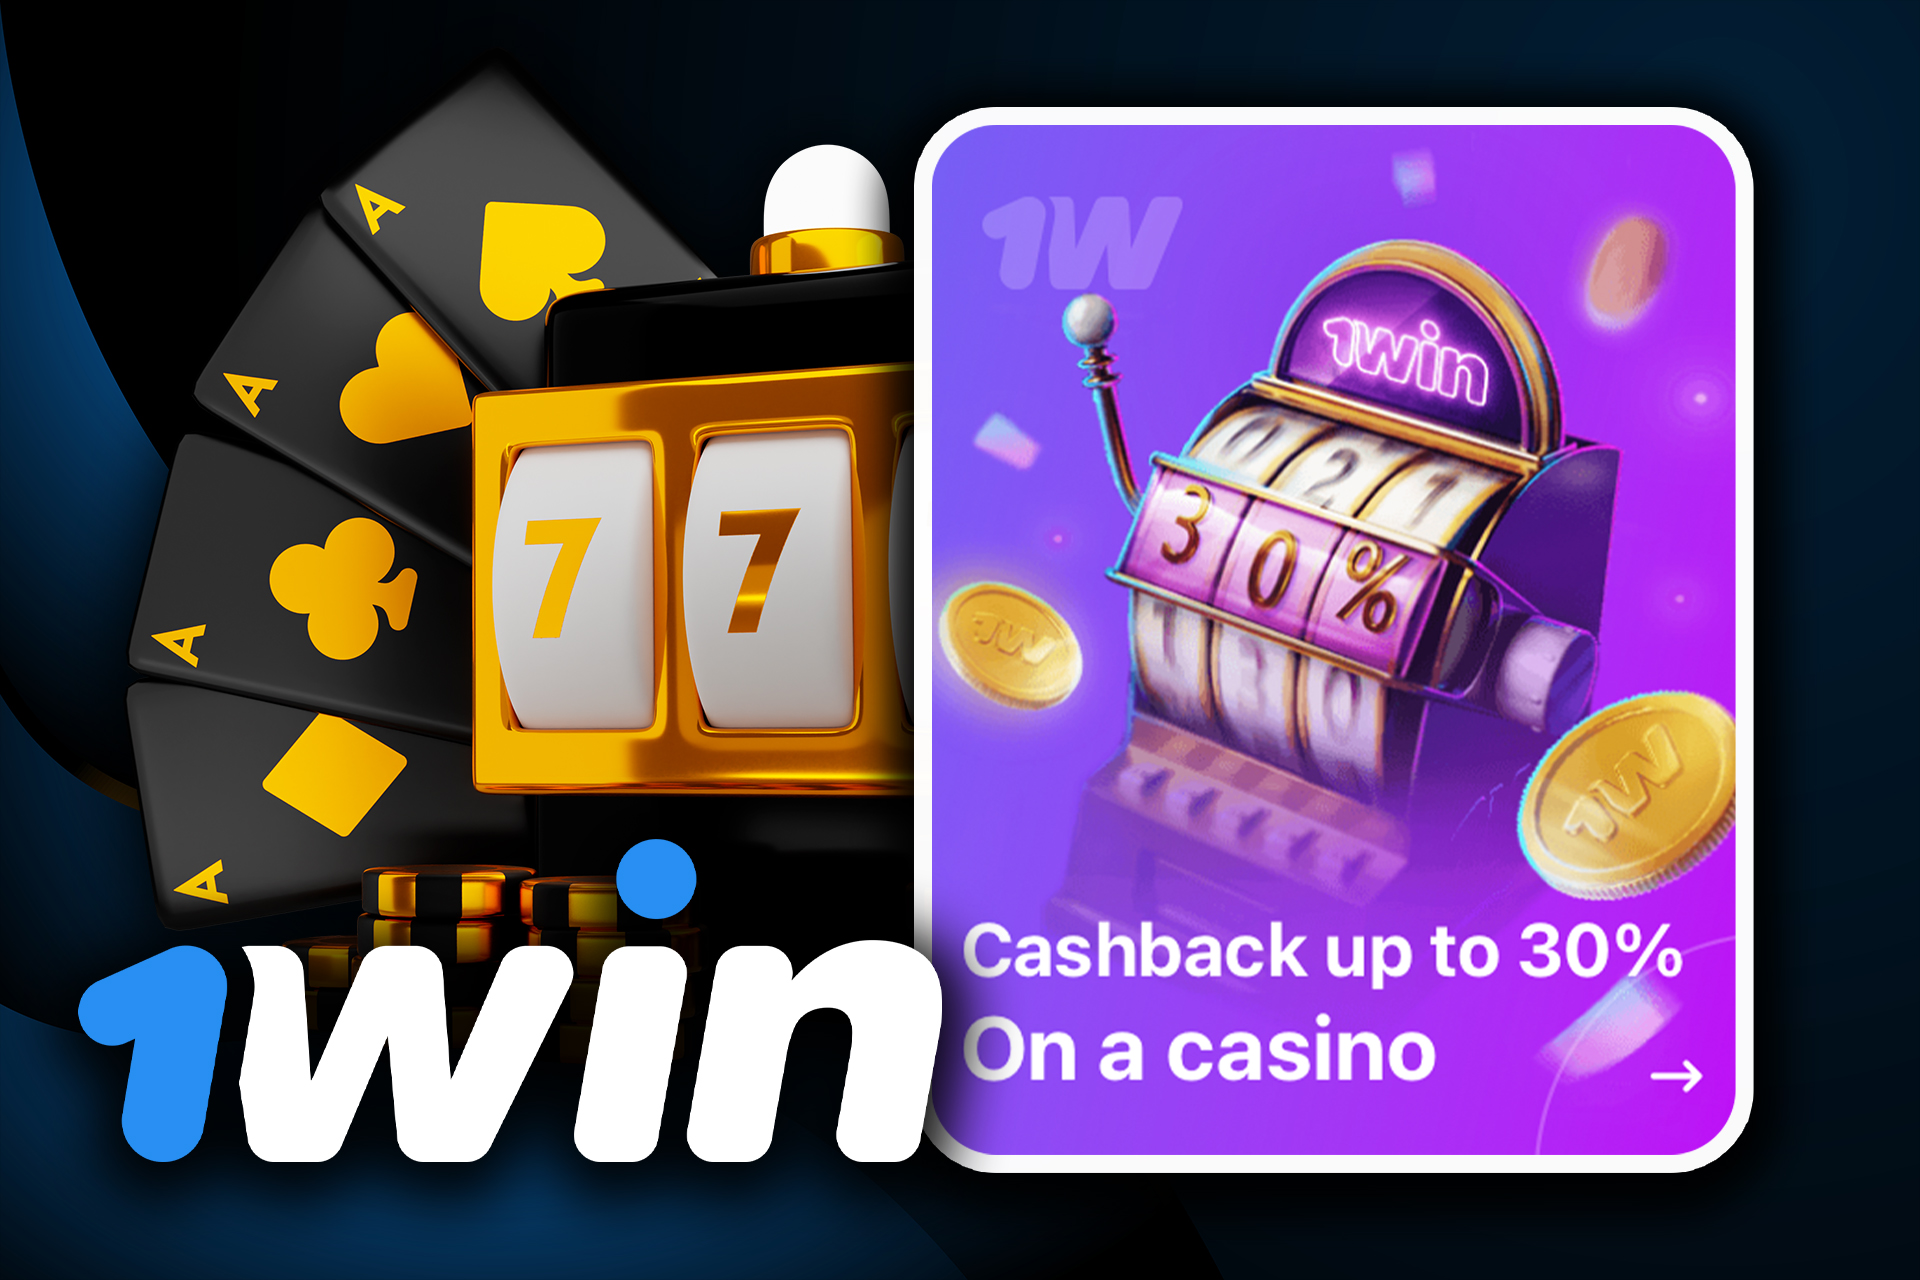 Get a 30% cashback on your losses in the 1win casino.